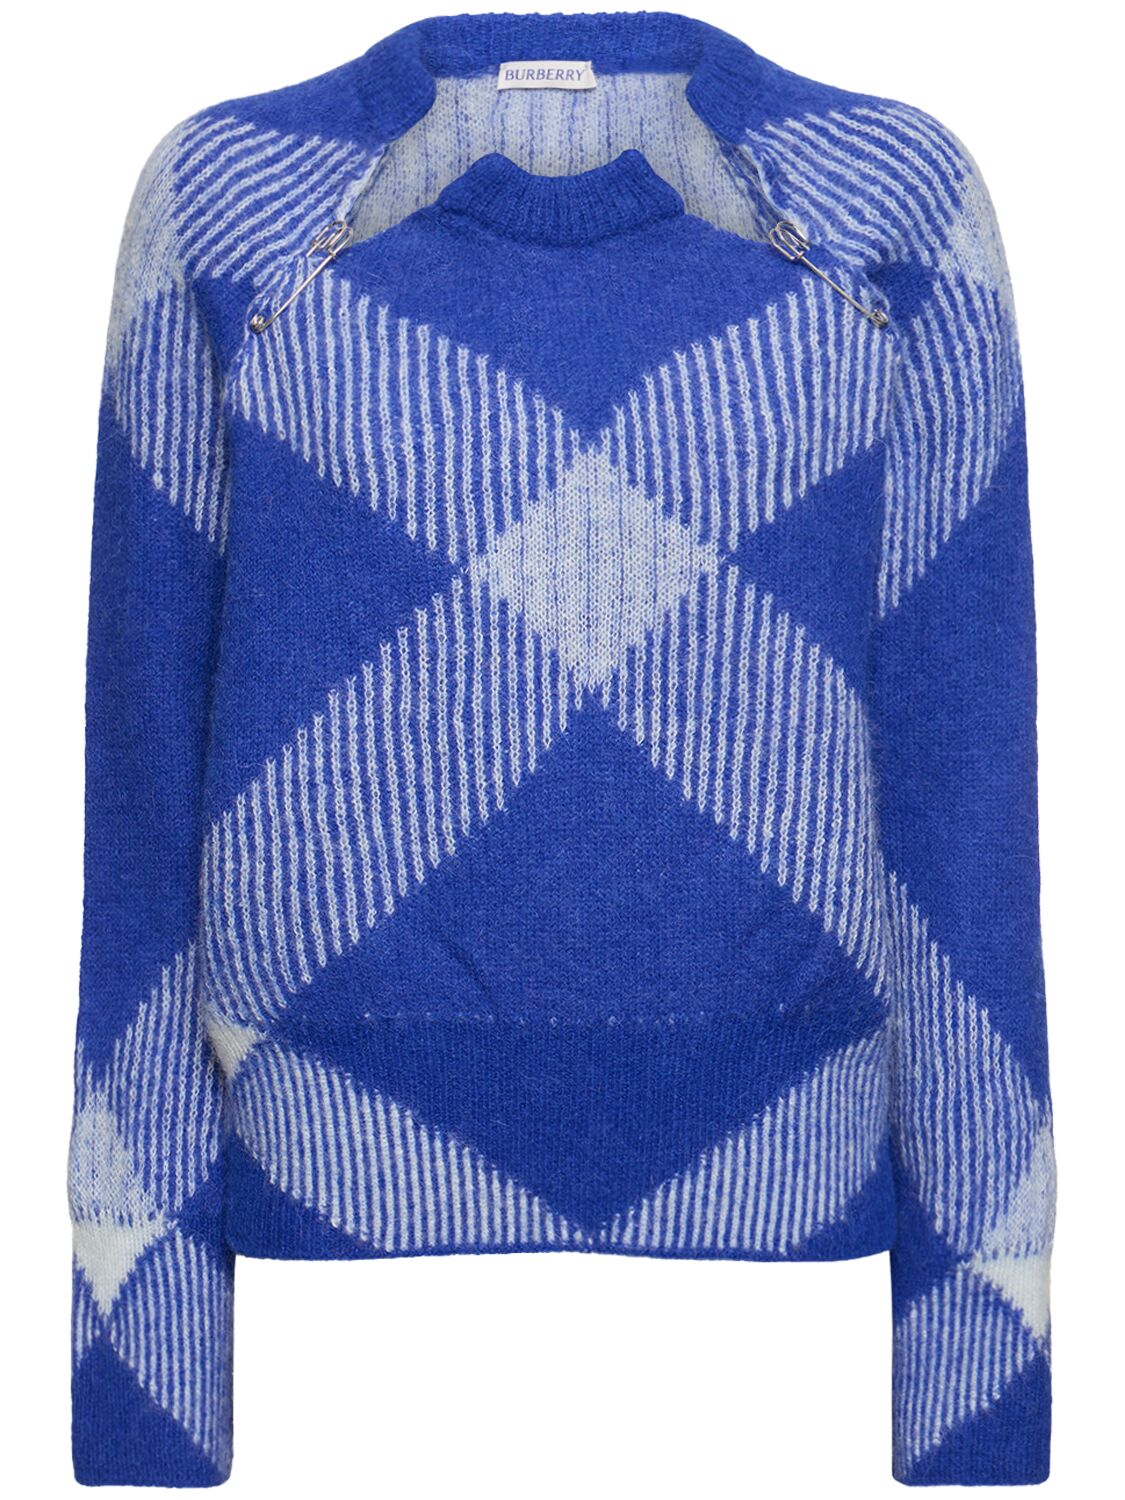 Image of Check Knit Squared Neckline Sweater